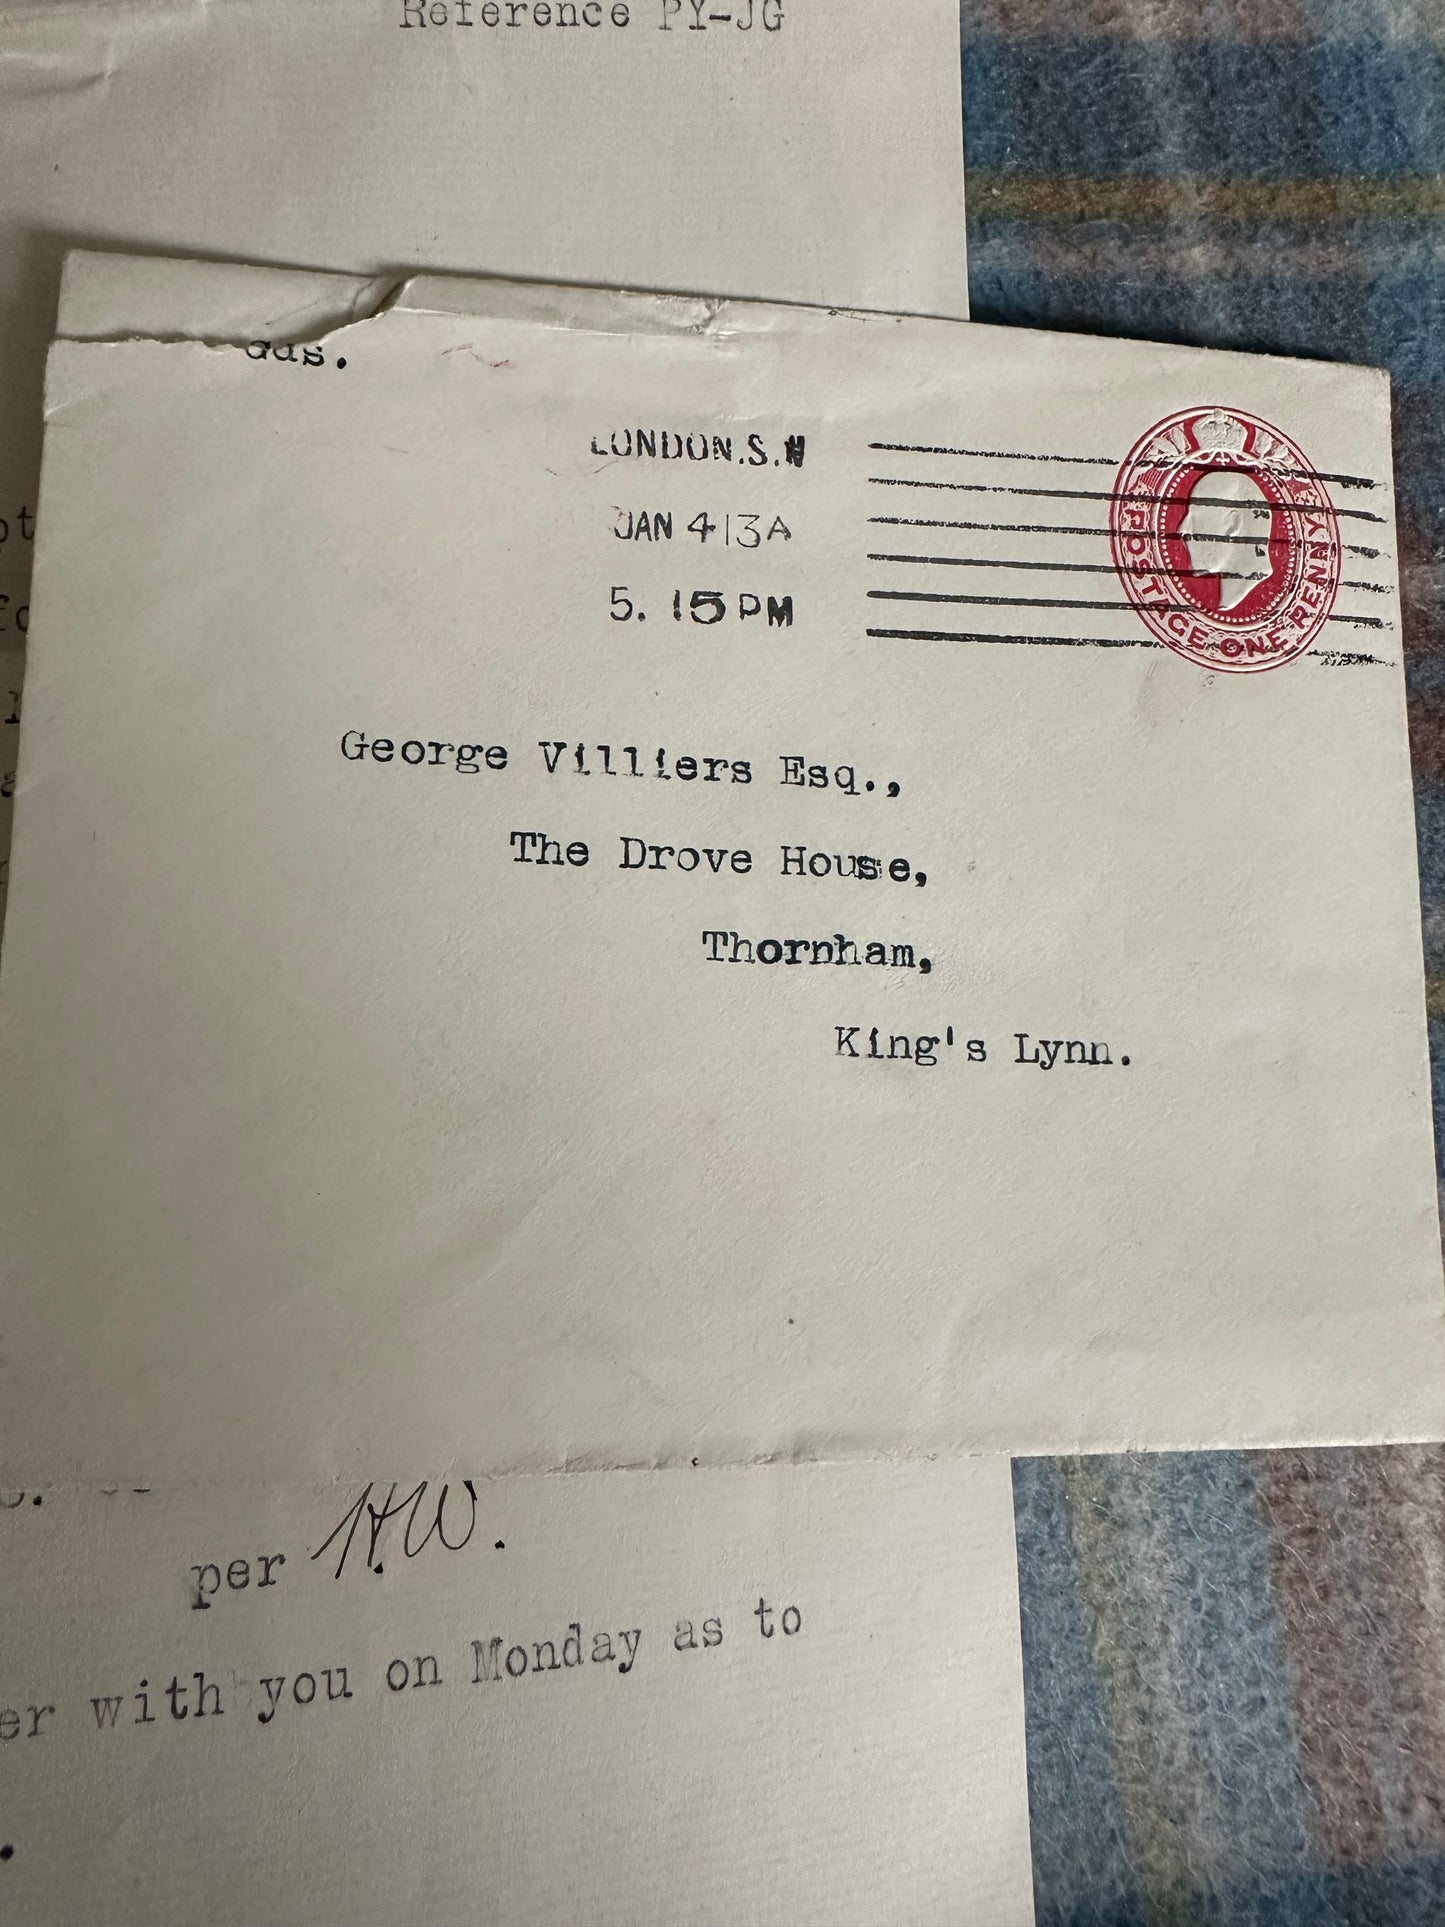 1913 Thomas Cook & Son very early travel letter from now closed travel agents Thomas Cook